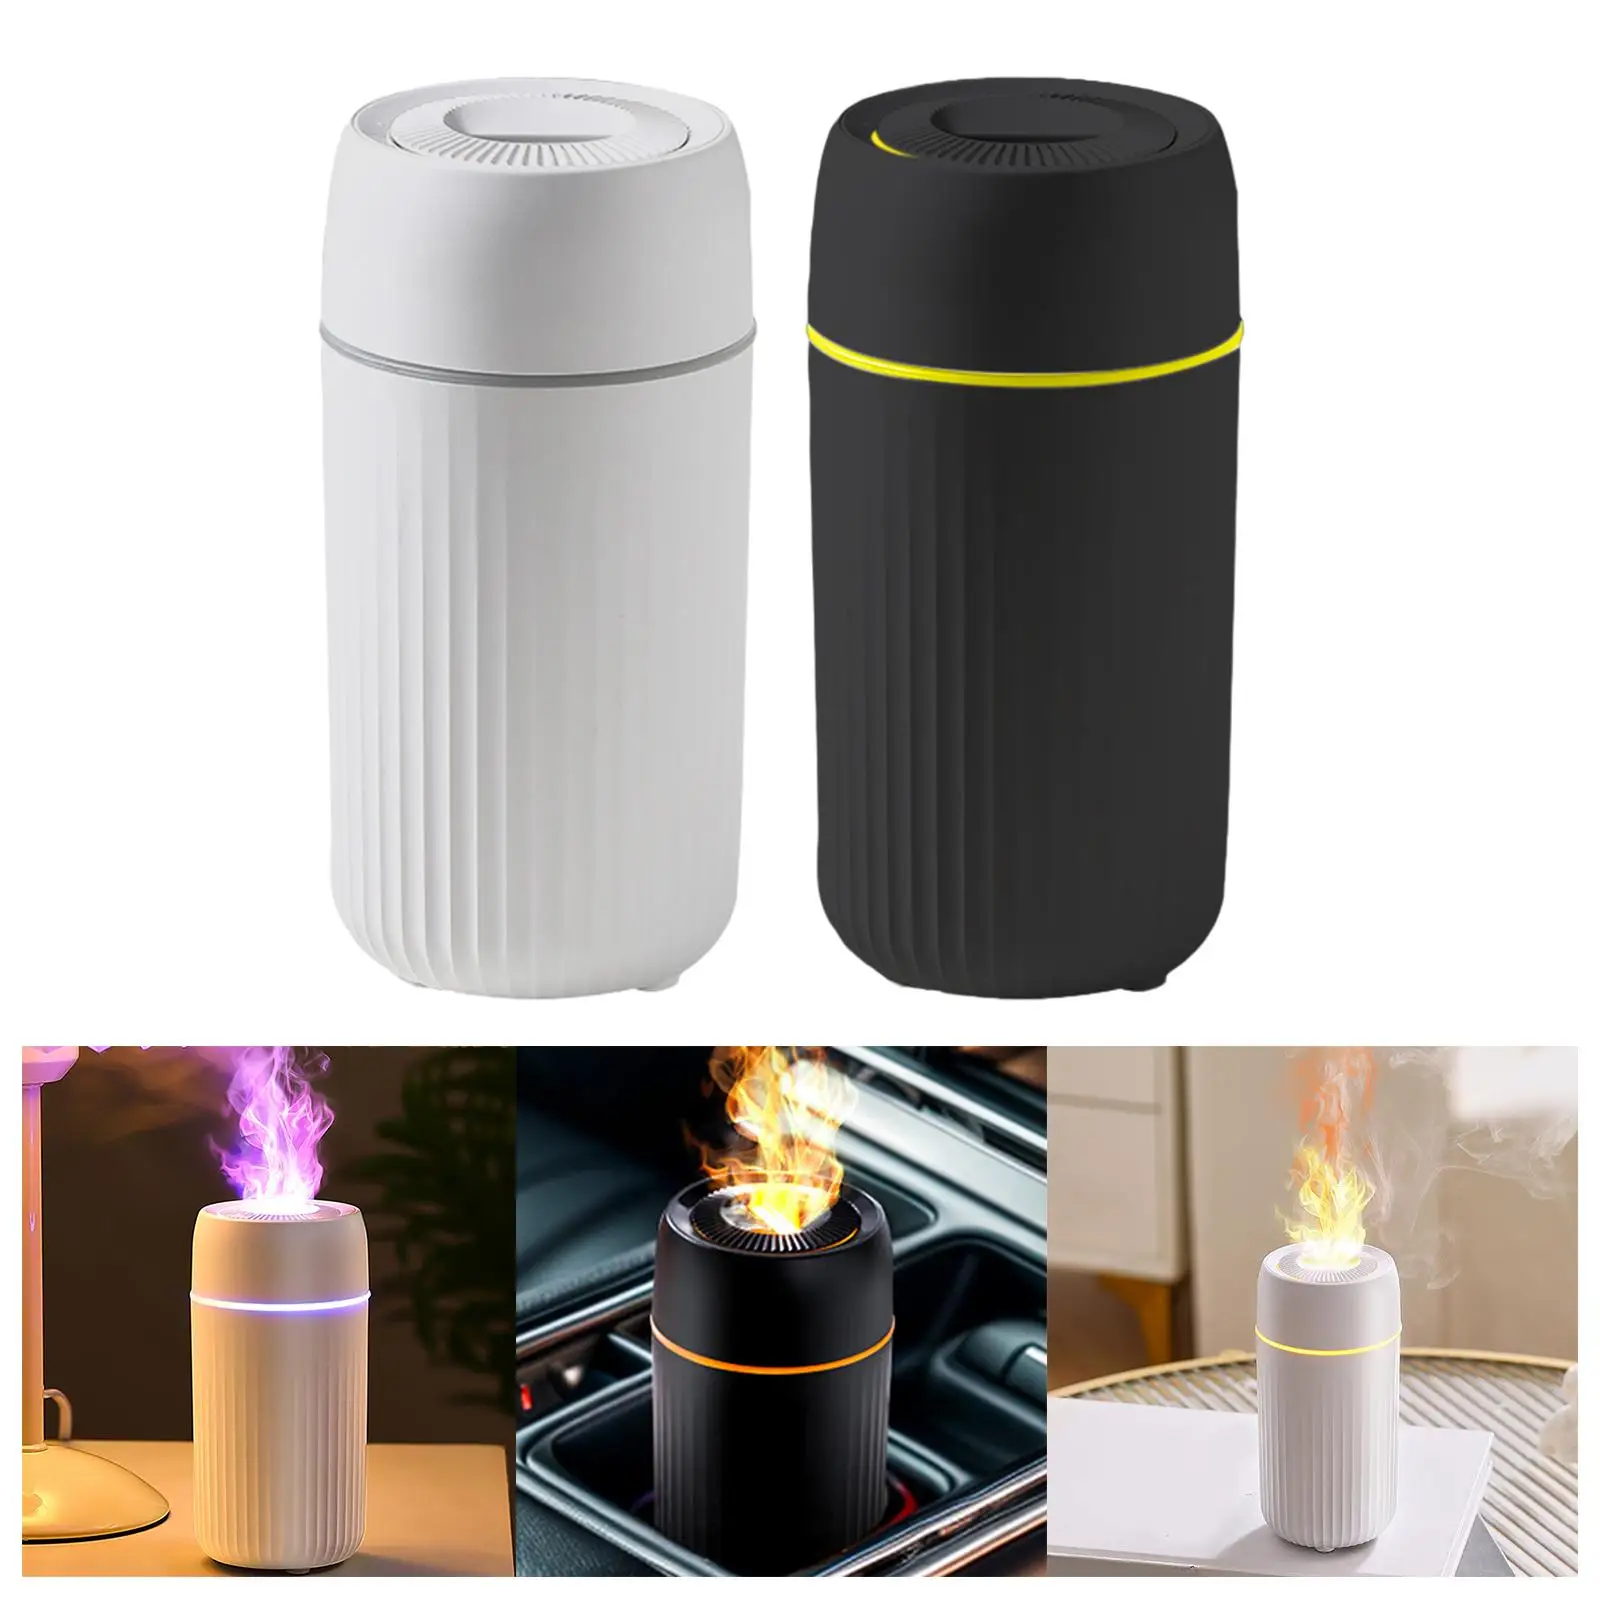 USB Aroma Diffuser Noiseless Air Diffuser 100ml Essential Oil Diffuser Quiet Desk Humidifier for SPA Room Car Office Living Room